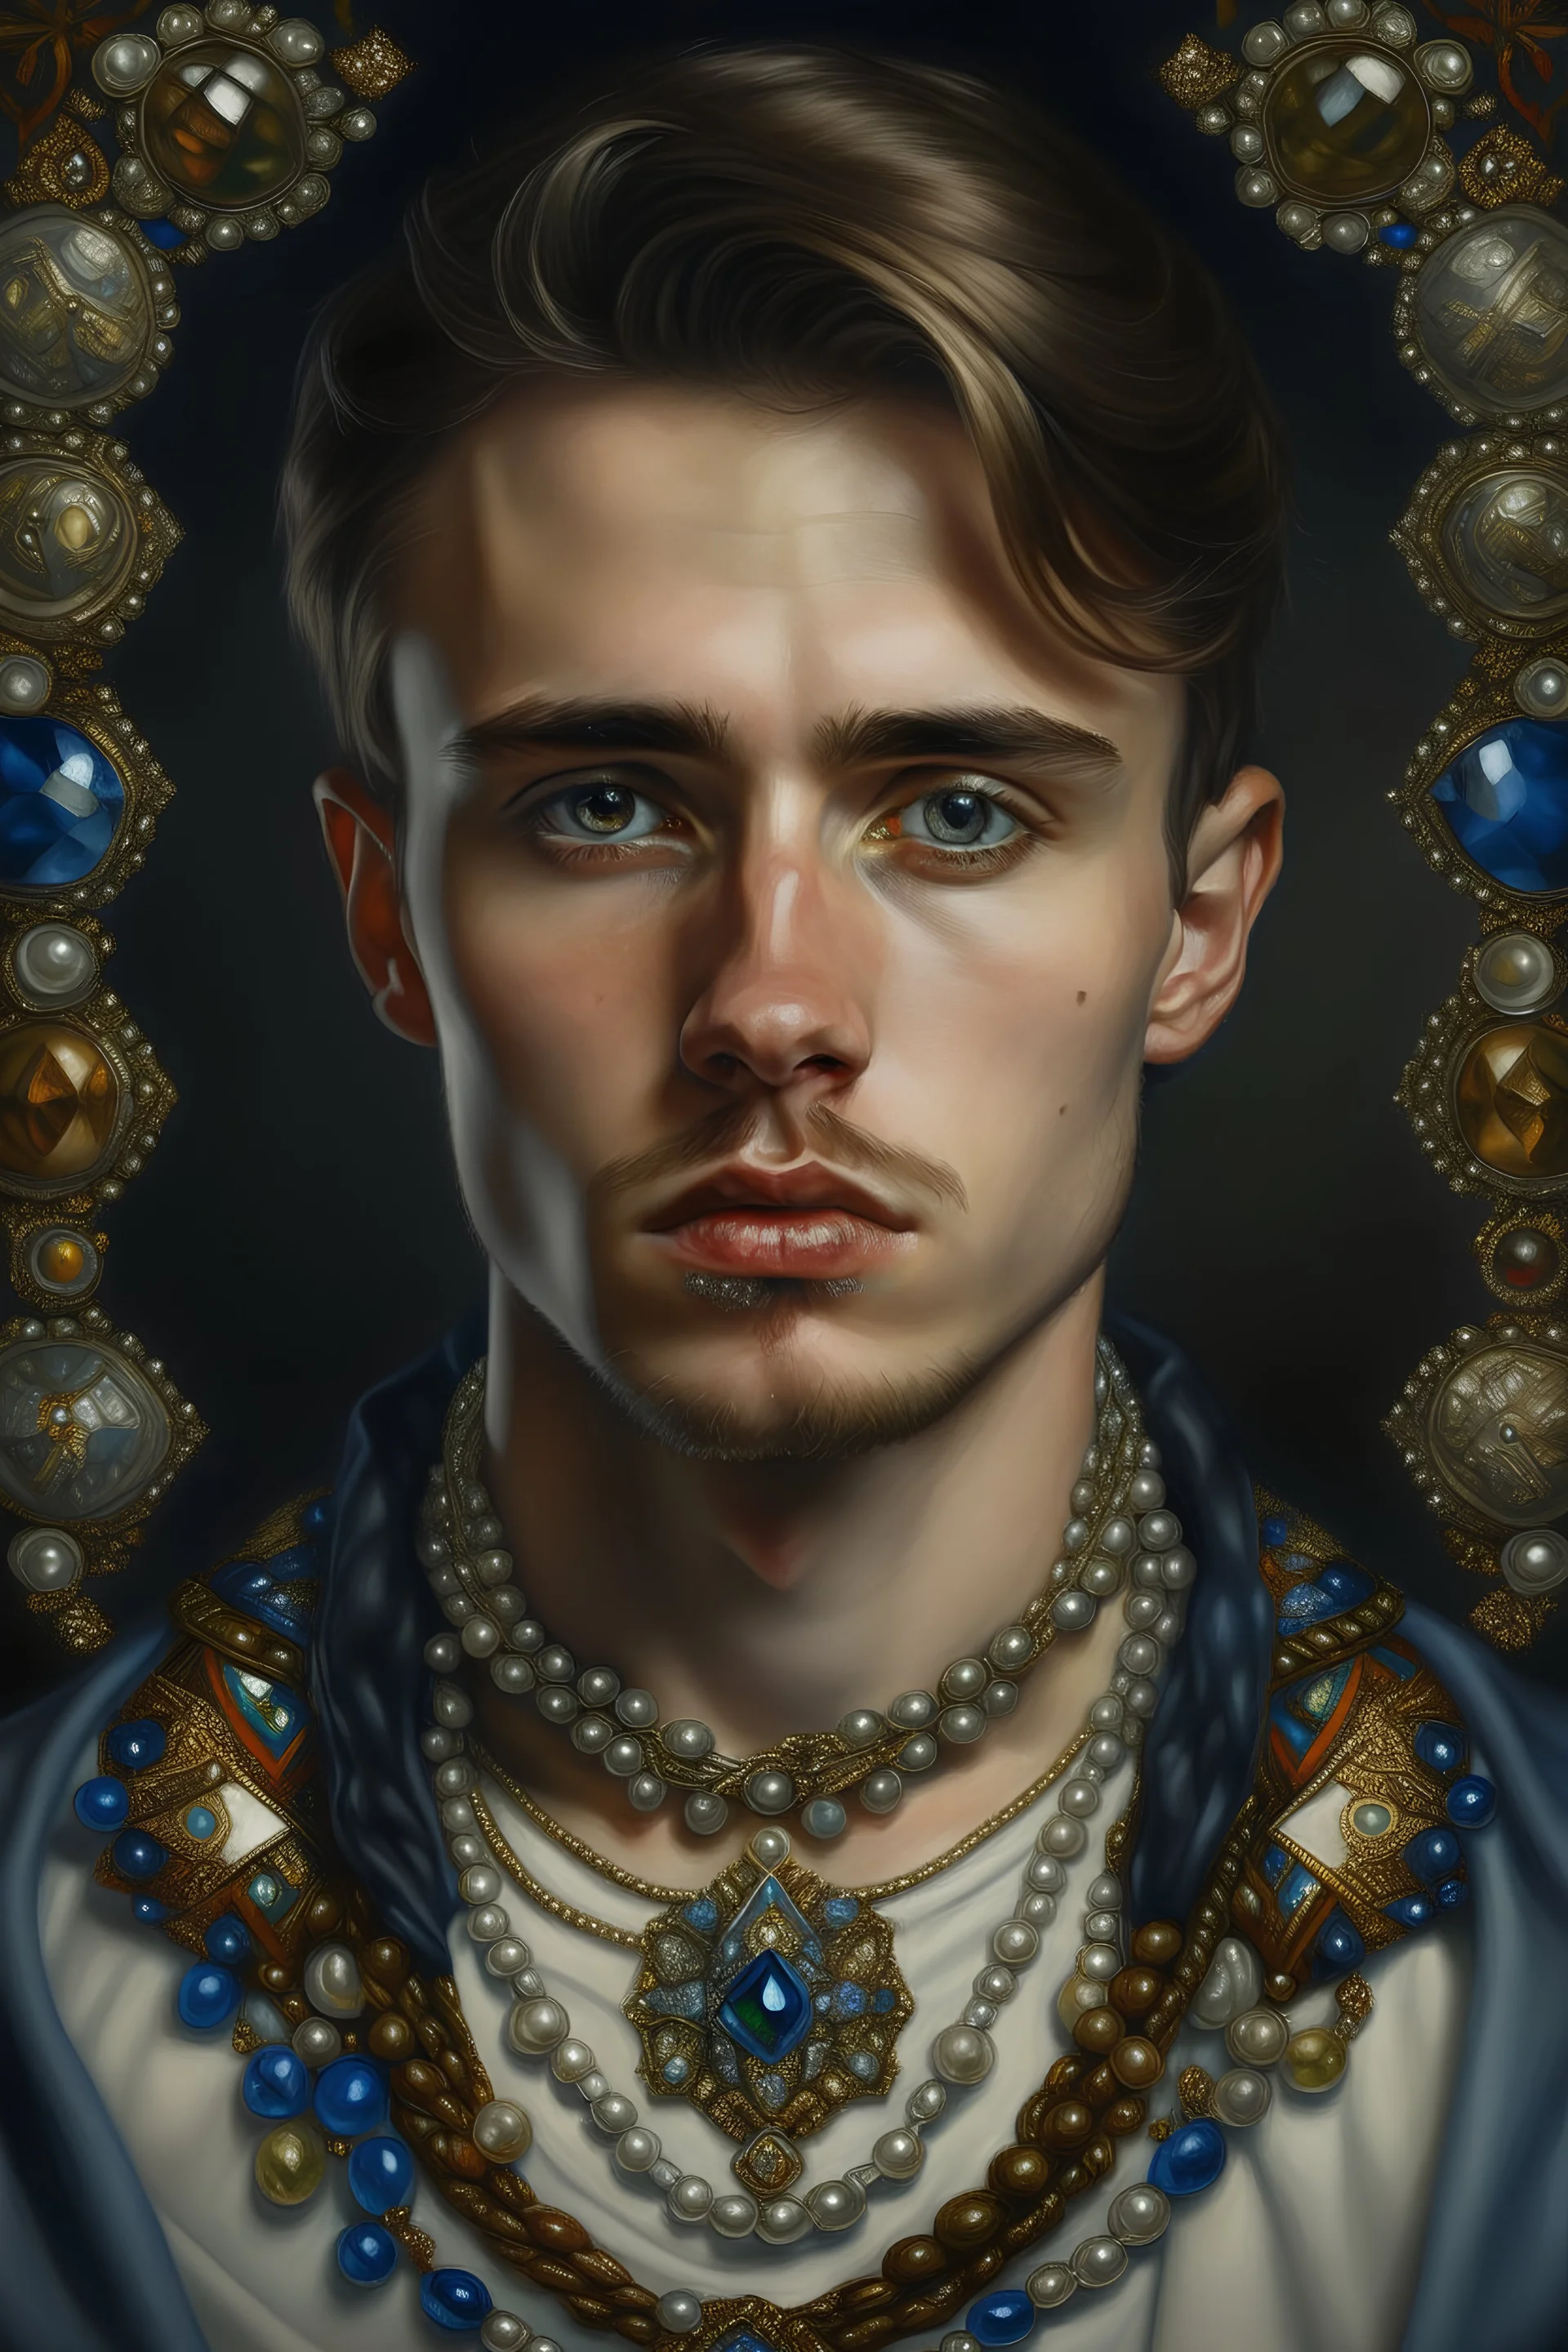 Portrait of a beautiful young man, decorated with jewels and precious stones, very beautiful detail hyperrealistic maximálist concept portrait art